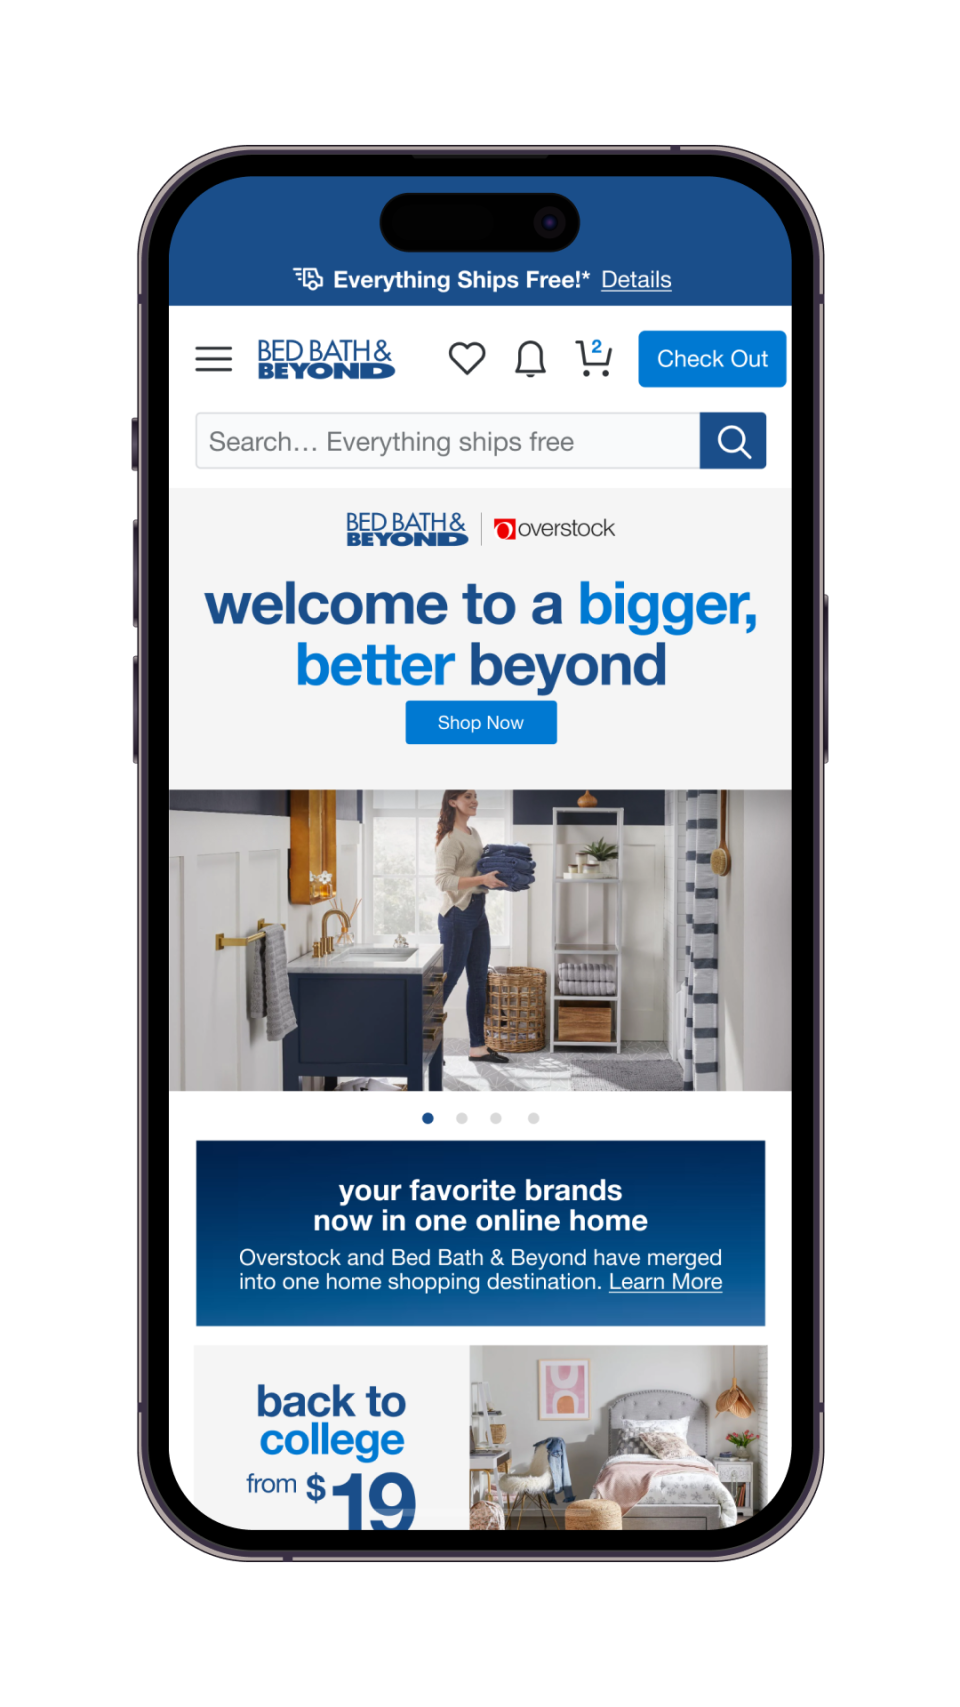 The new Bed Bath & Beyond mobile App.